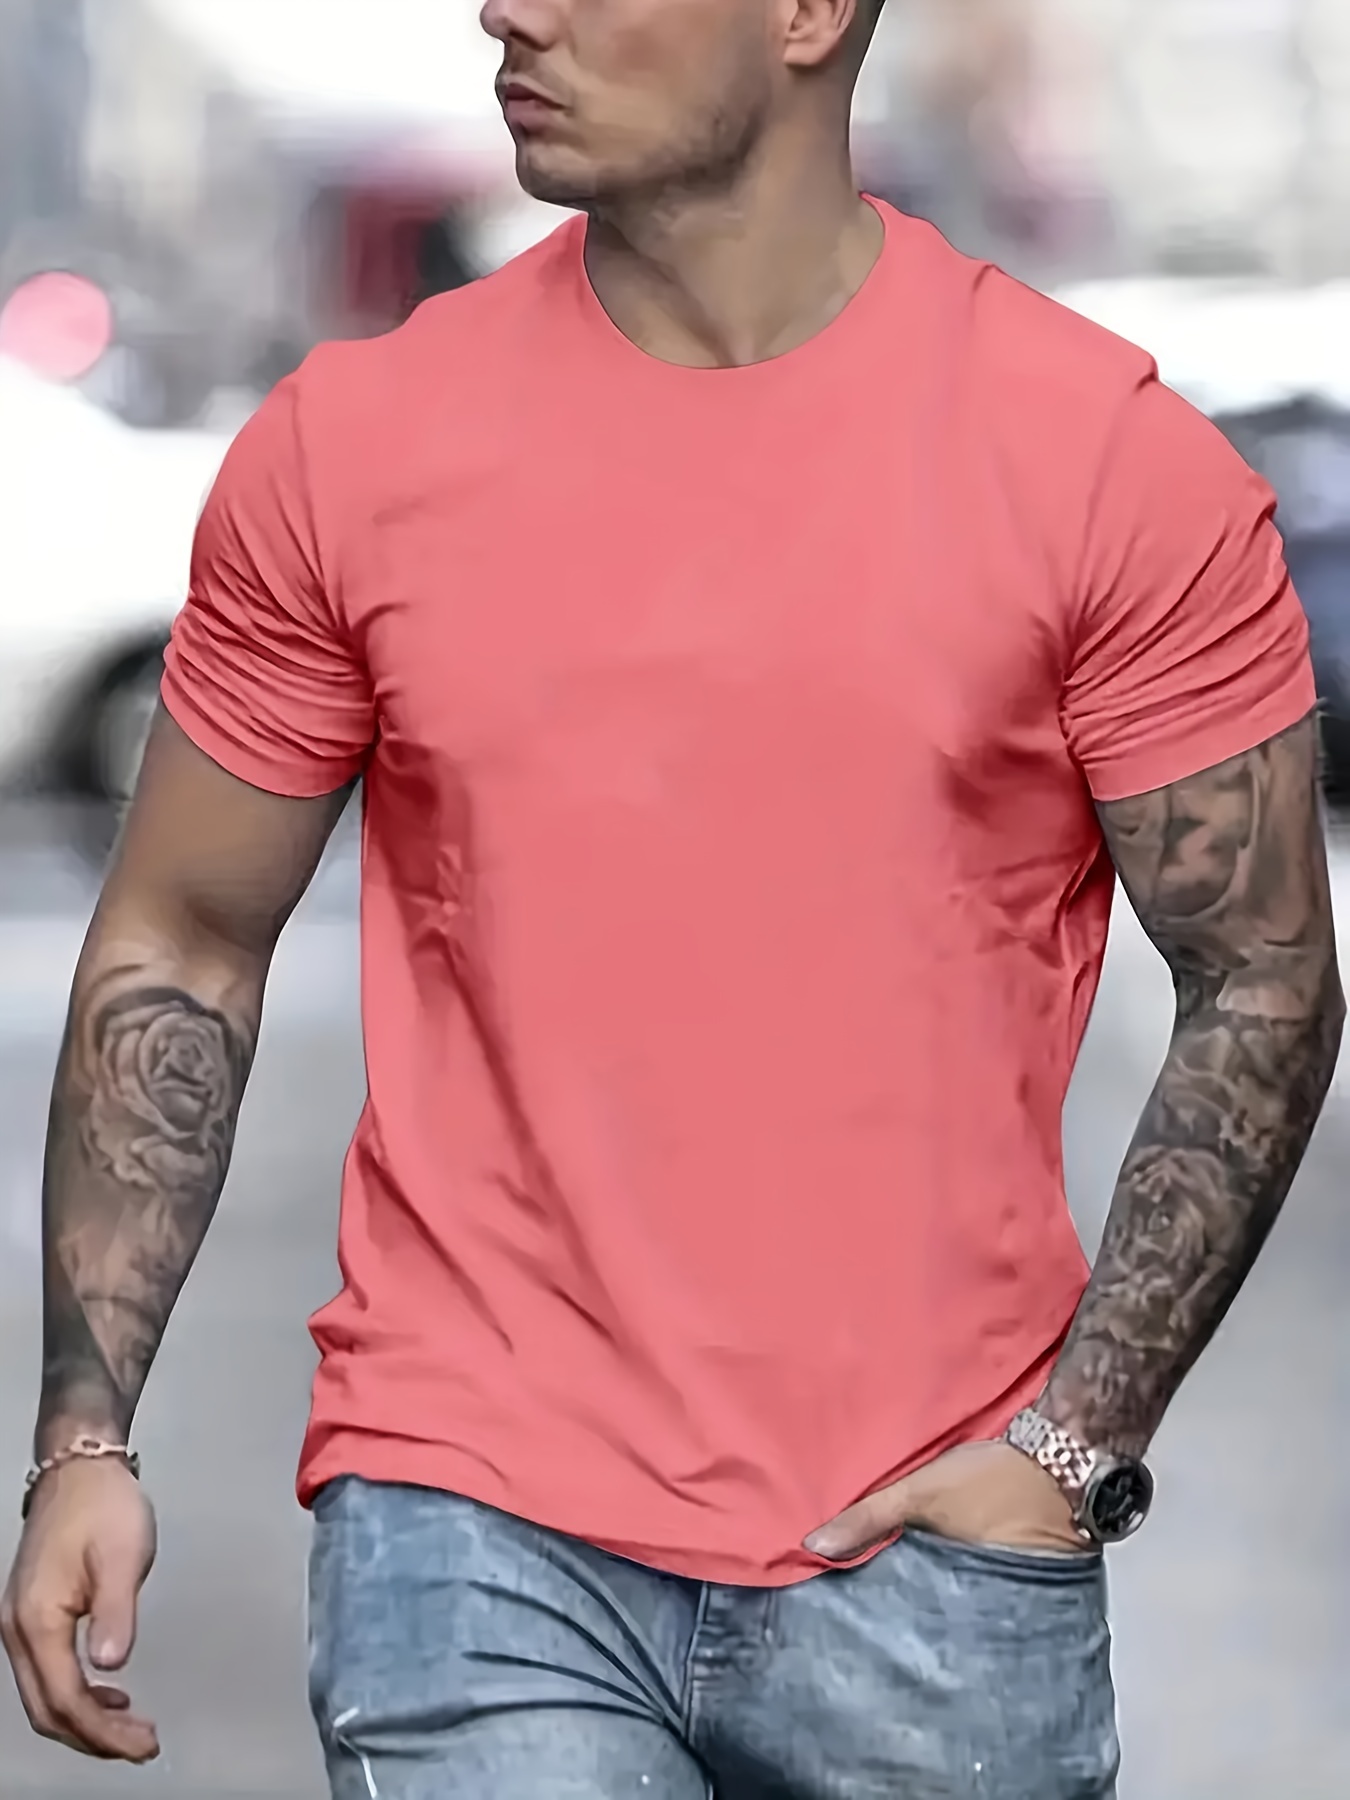 Baby Pink T-Shirt for Men